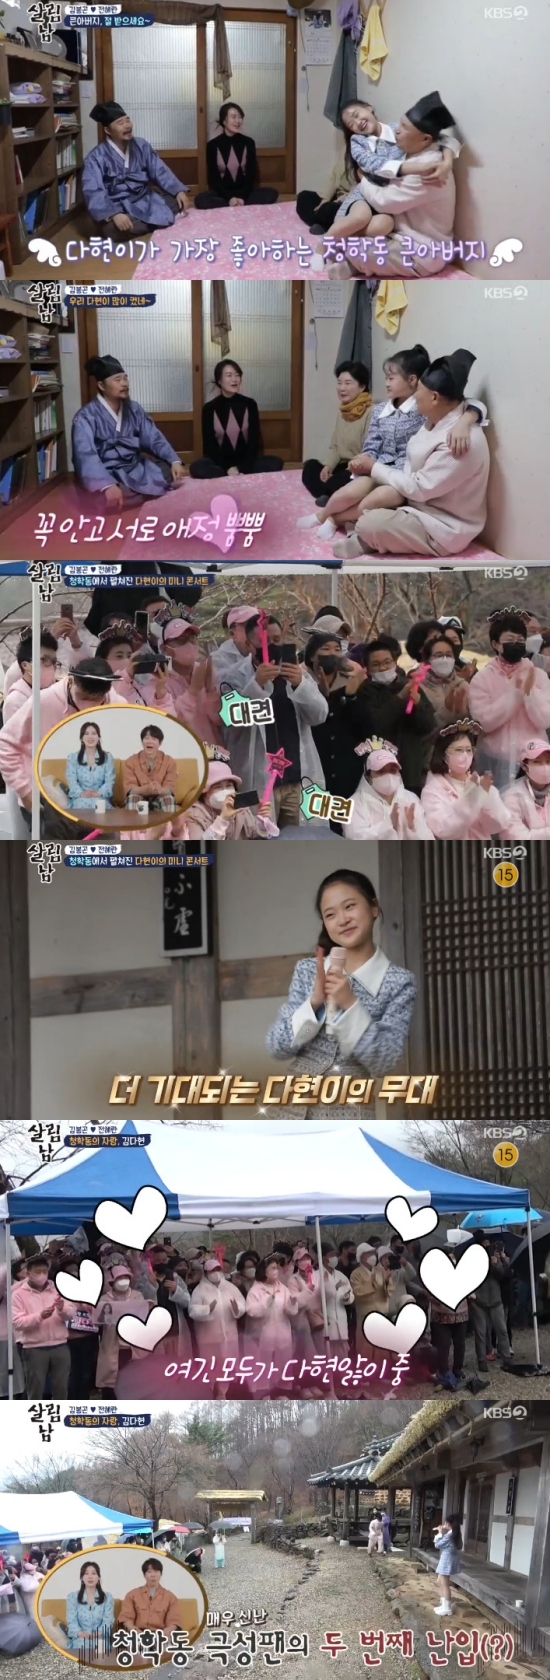 Trot singer Kim Dahyun found Cheonghak-dong.On the 2nd KBS 2TV Saving Men Season 2, Kim Dahyun visited Cheonghak-dong.On the day, Kim Bong-gon and Kim Bong-gon wife took Kim Dahyun to Cheonghak-dong.Kim Dahyun Gil was created in Cheonghak-dong, and Kim Dahyuns father was waiting with many people.Kim Dahyun ran to his arms as soon as he saw Kim Dahyuns father, and could not hide his joy.The production team asked, Is there a reason you do not say that you are a soul? Kim Dahyun said, Decoration is a decoration. It is a white water for three years.Dahyun is much better at the big Father, he said.Kim Dahyun sat on Uncle Kim Dahyuns lap and was charming, saying he wanted to see.Haheera, who watched the video, admired that Dahyun is not easy to do that at age, and I seem to like my uncle a lot.Kim Dahyun also showed off his affection, saying, So I said, I wanted to come. I wanted to see it. Kim Dahyun said, I have a lot of fans and villagers.The big Father created a concert hall.Lets listen to your voice, said Kim Dahyuns fans, dressed in pink despite the rainy weather, waiting in the space set up by Kim Dahyuns father.Kim Dahyun set up a stage full of excitement, and Kim Dahyuns father danced on stage and danced together.Cheonghak-dong residents think of Dahyun as a star, Im proud, added Uncle Kim Dahyun.Furthermore, Uncle Kim Dahyun said, I have a big meaning. I do not know if you feel bad, but I have to change the generation.Dahyun is here to do business with the same star. Youve been to Chung Dong-wons cafe. Thats not true. Its good for the fans.Kim Dahyun said he planned to build a three-story building in the clearing, saying, The cafe on the first floor, the practice room on the second floor.On the third floor, live here. Kim Dahyun, mother, said, It is not ridiculous at all.Kim Dahyun said, It is part of me and the groom to greet and greet many fans who come to see Dahyun.I am so grateful that you are in your position to replace him. I think it can be a great help for Dahyun. Dahyun has a road and (tourists) 40 percent more come, added Kim Dahyun, who expressed his desire to announce Cheonghak-dongs attractions and specialty.Kim Dahyuns father expressed his aspirations, saying, The Cheonghak-dong future depends on you.Photo = KBS Broadcasting Screen